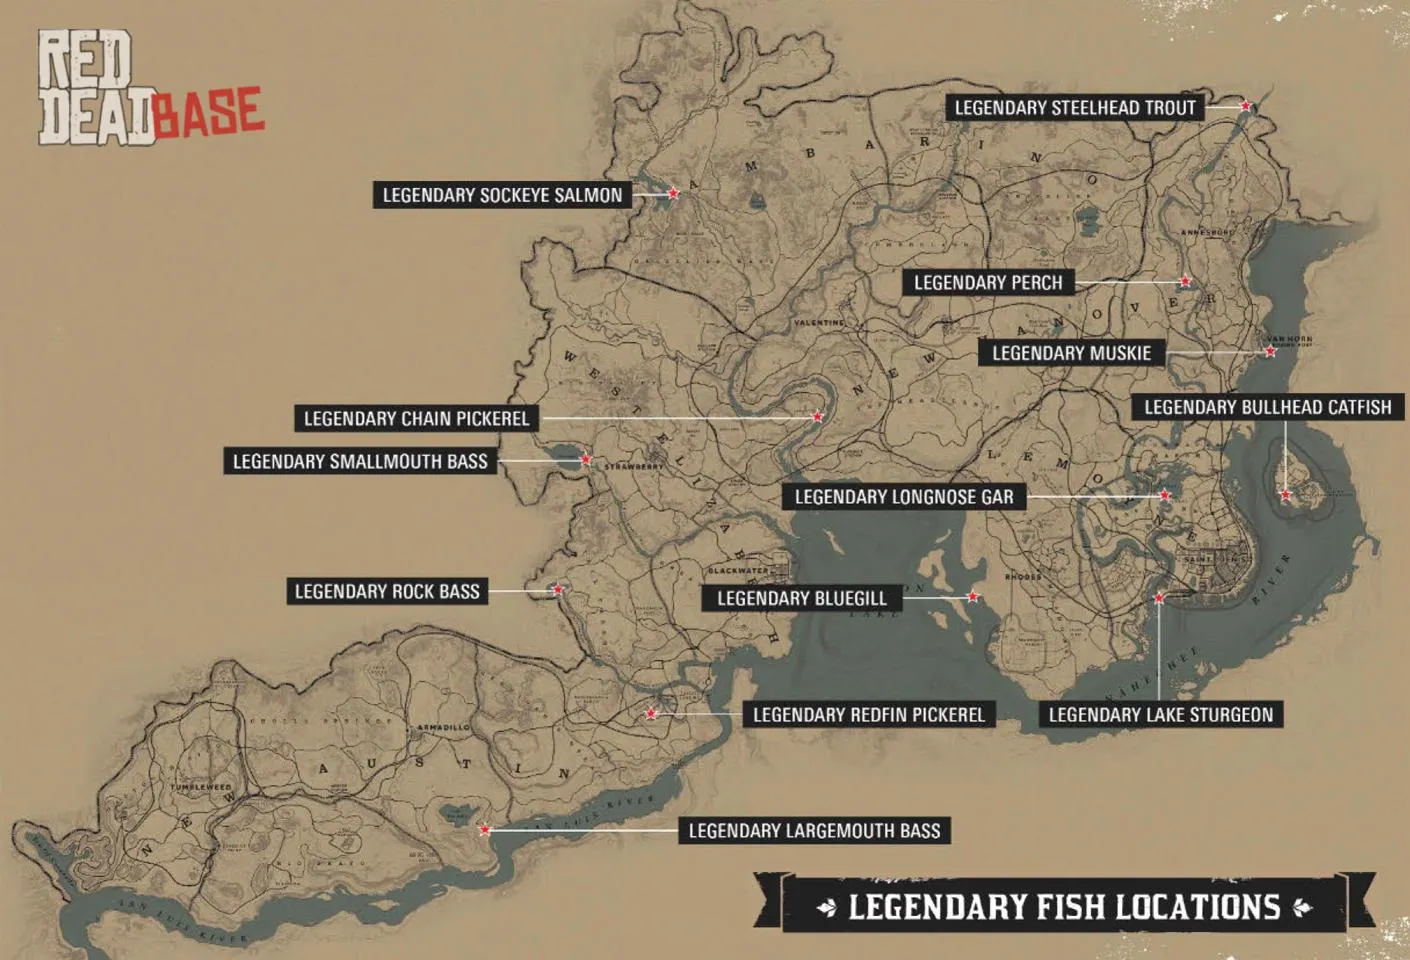 Legendary Muskie - Map Location in RDR2